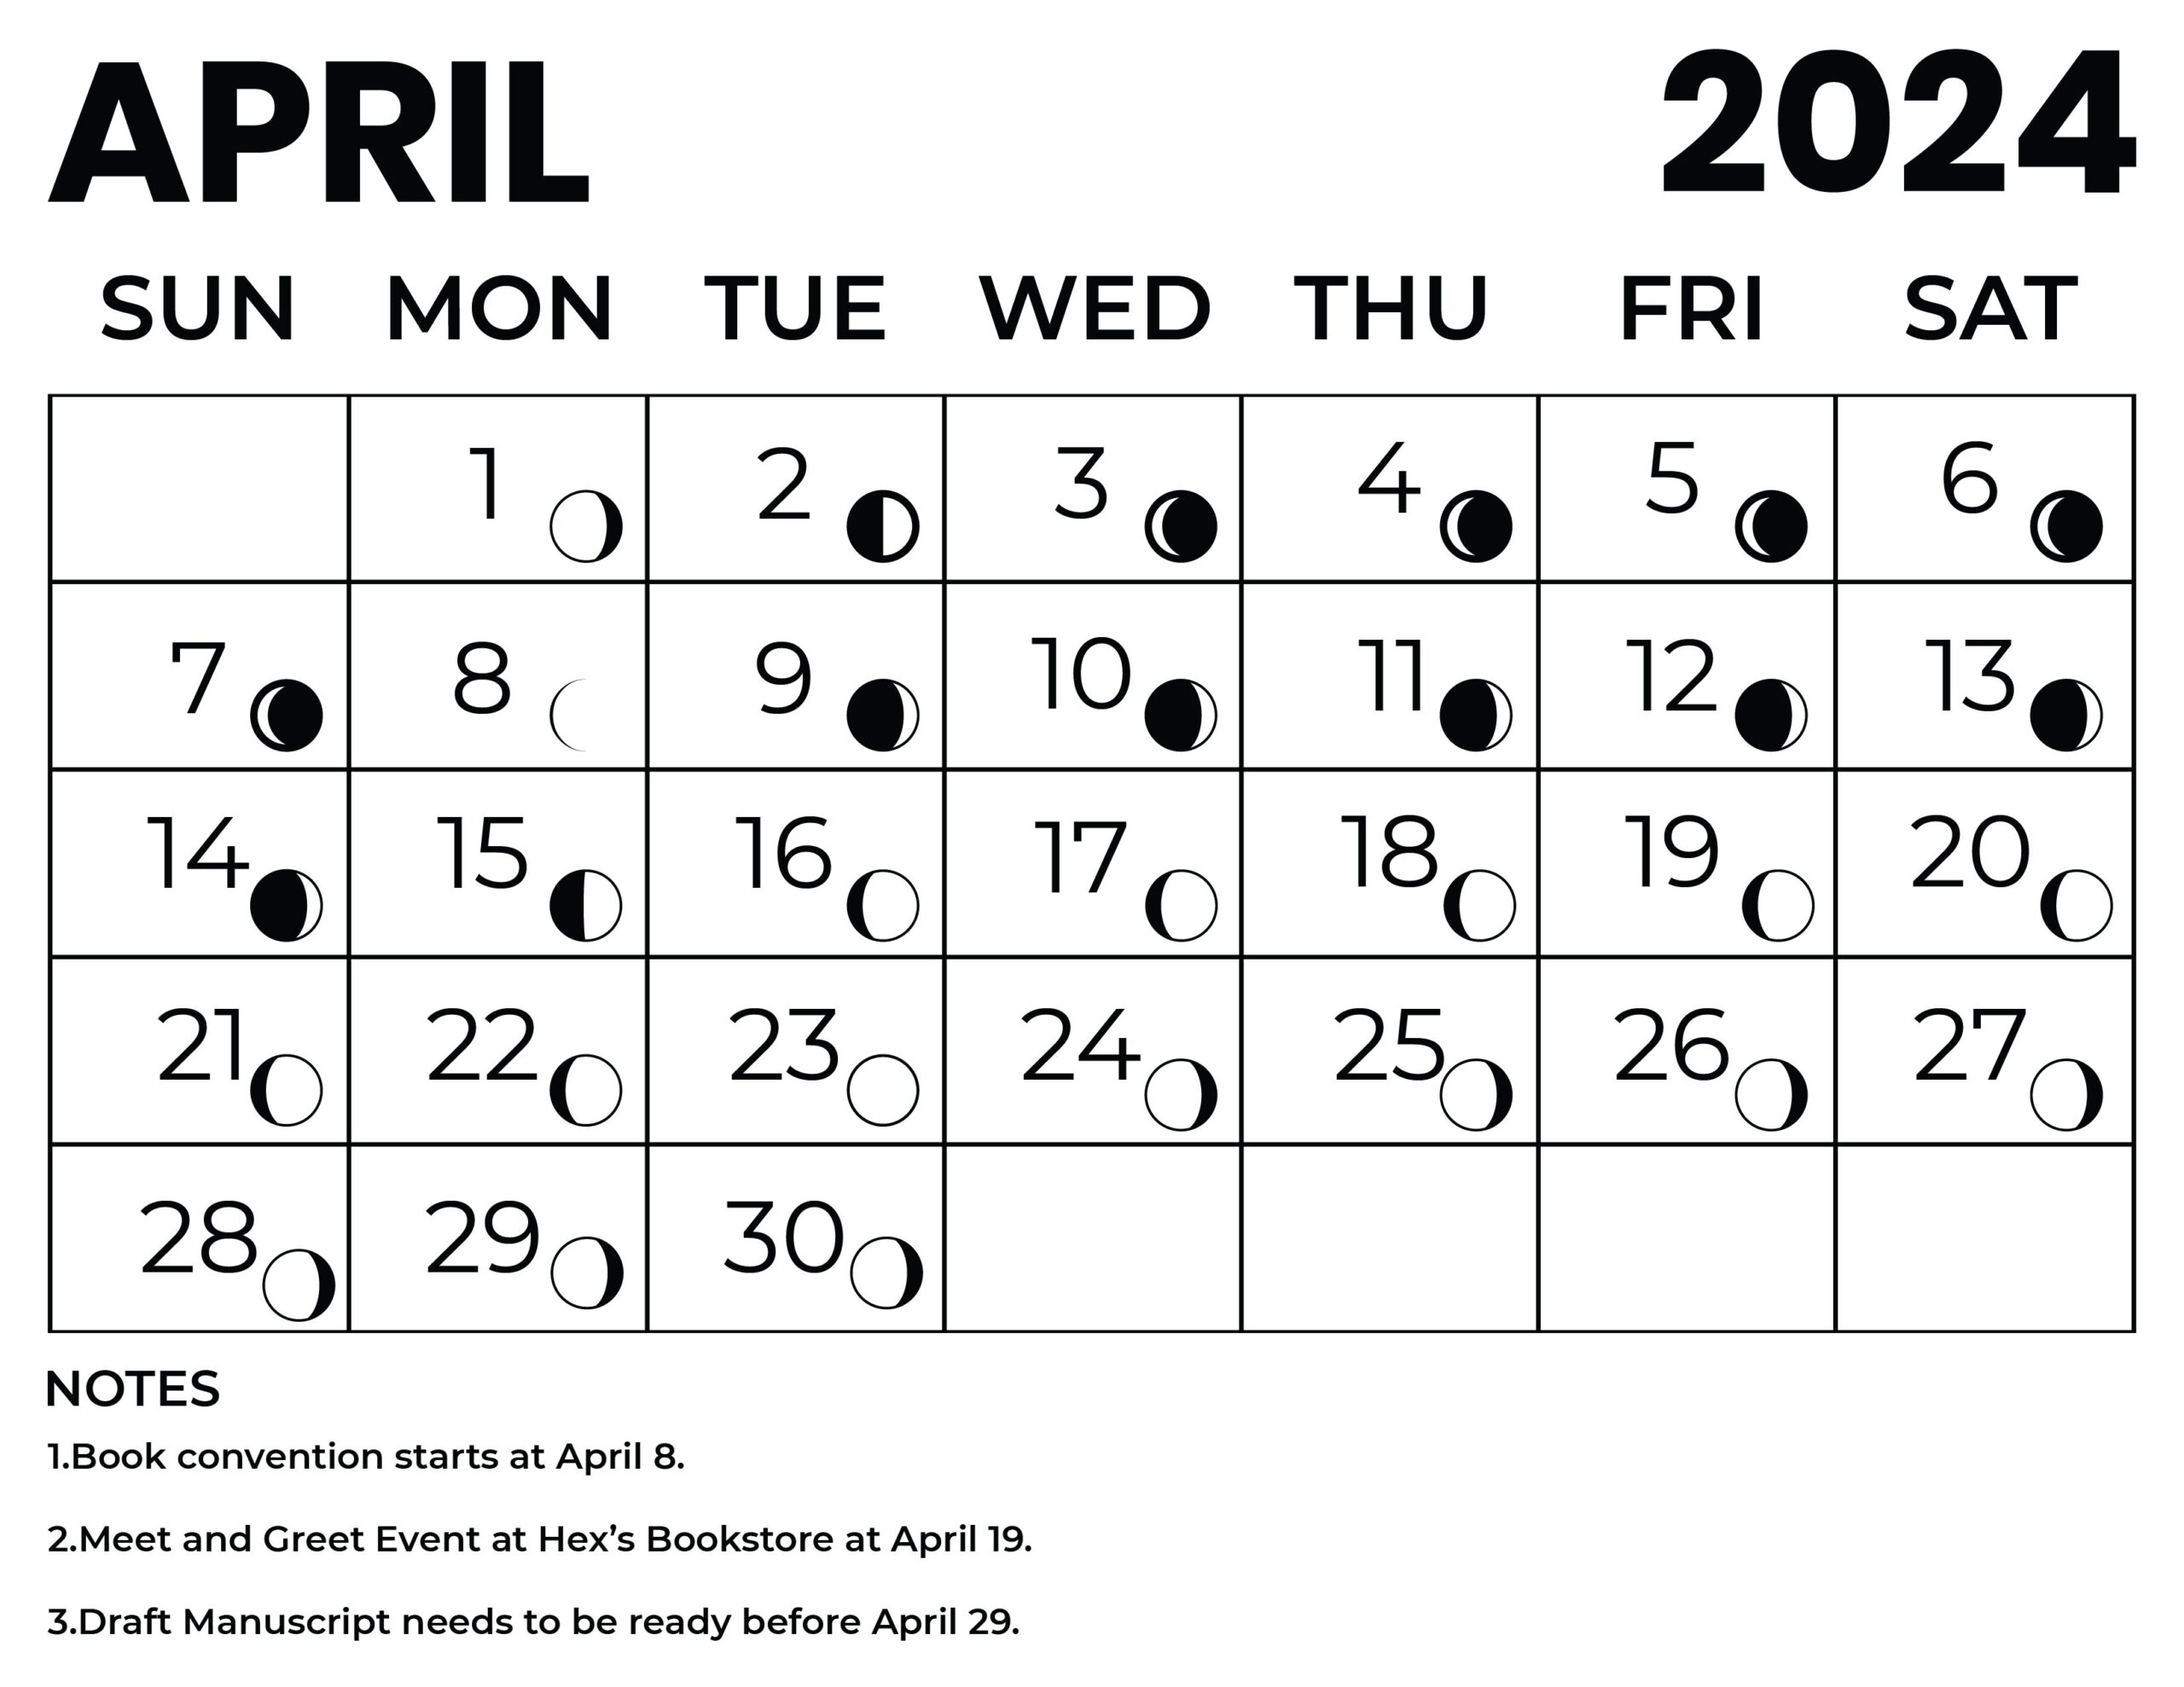 April 2024 Calendar With Moon Phases - Word, Illustrator, Eps, Svg for Printable Calendar With Moon Phases 2024